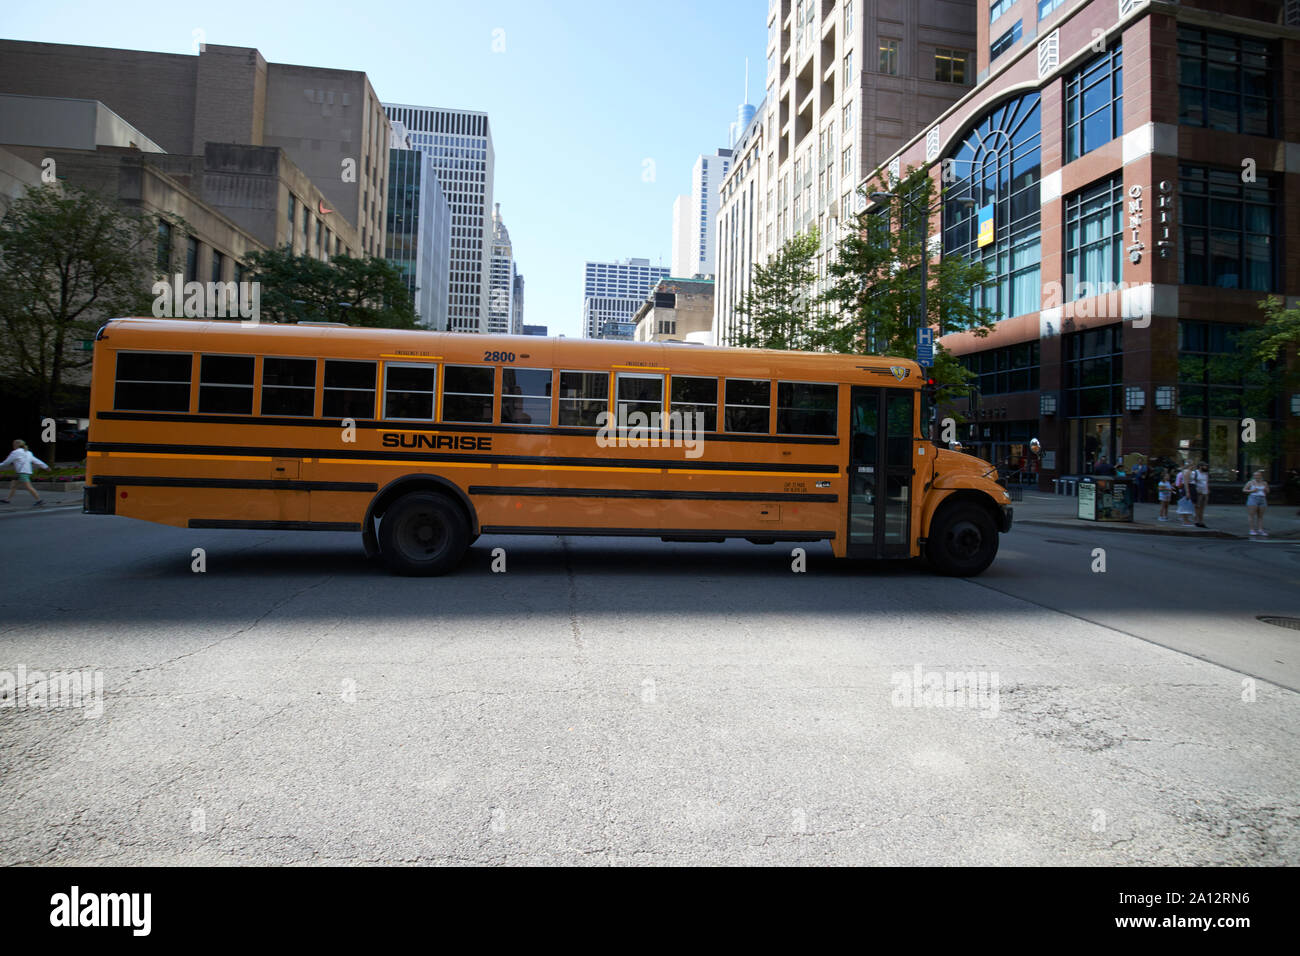 navistar sunrise charter school bus in shade crossing intersection in downtown chicago illinois united states of america Stock Photo